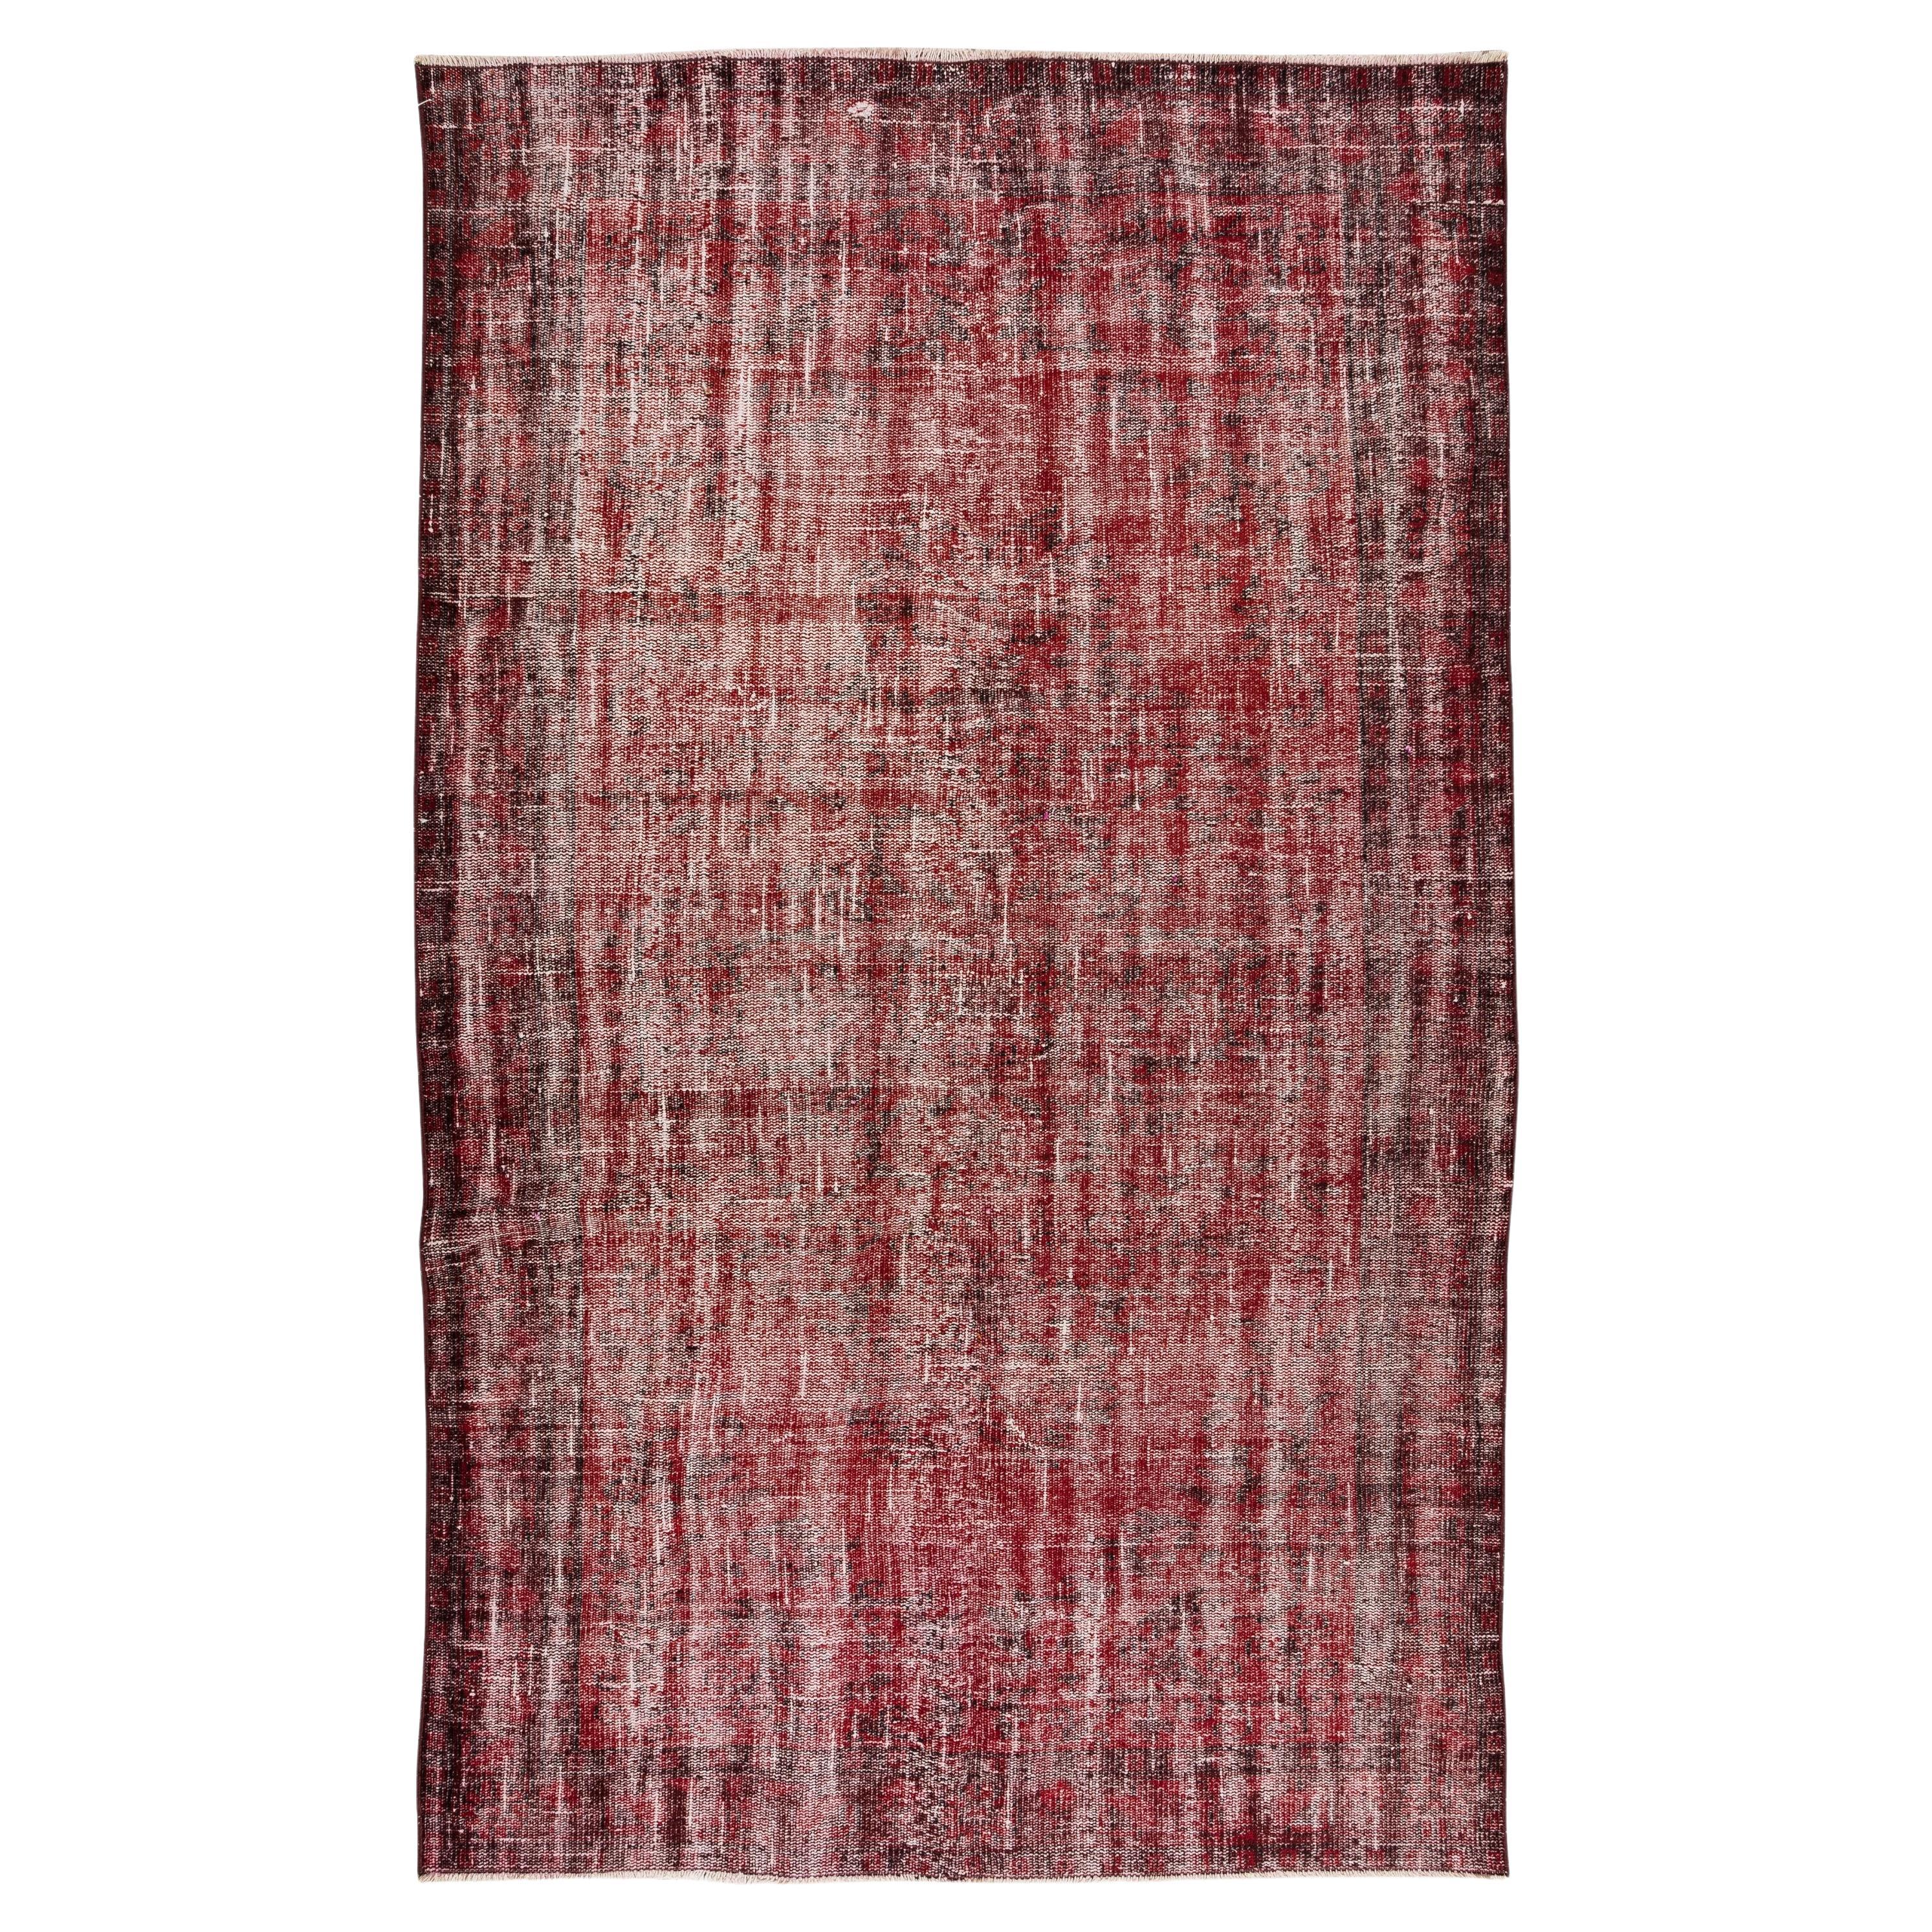 5.3x9 Ft Red Modern Carpet, Distressed Hand-Knotted Anatolian Mid-Century Rug